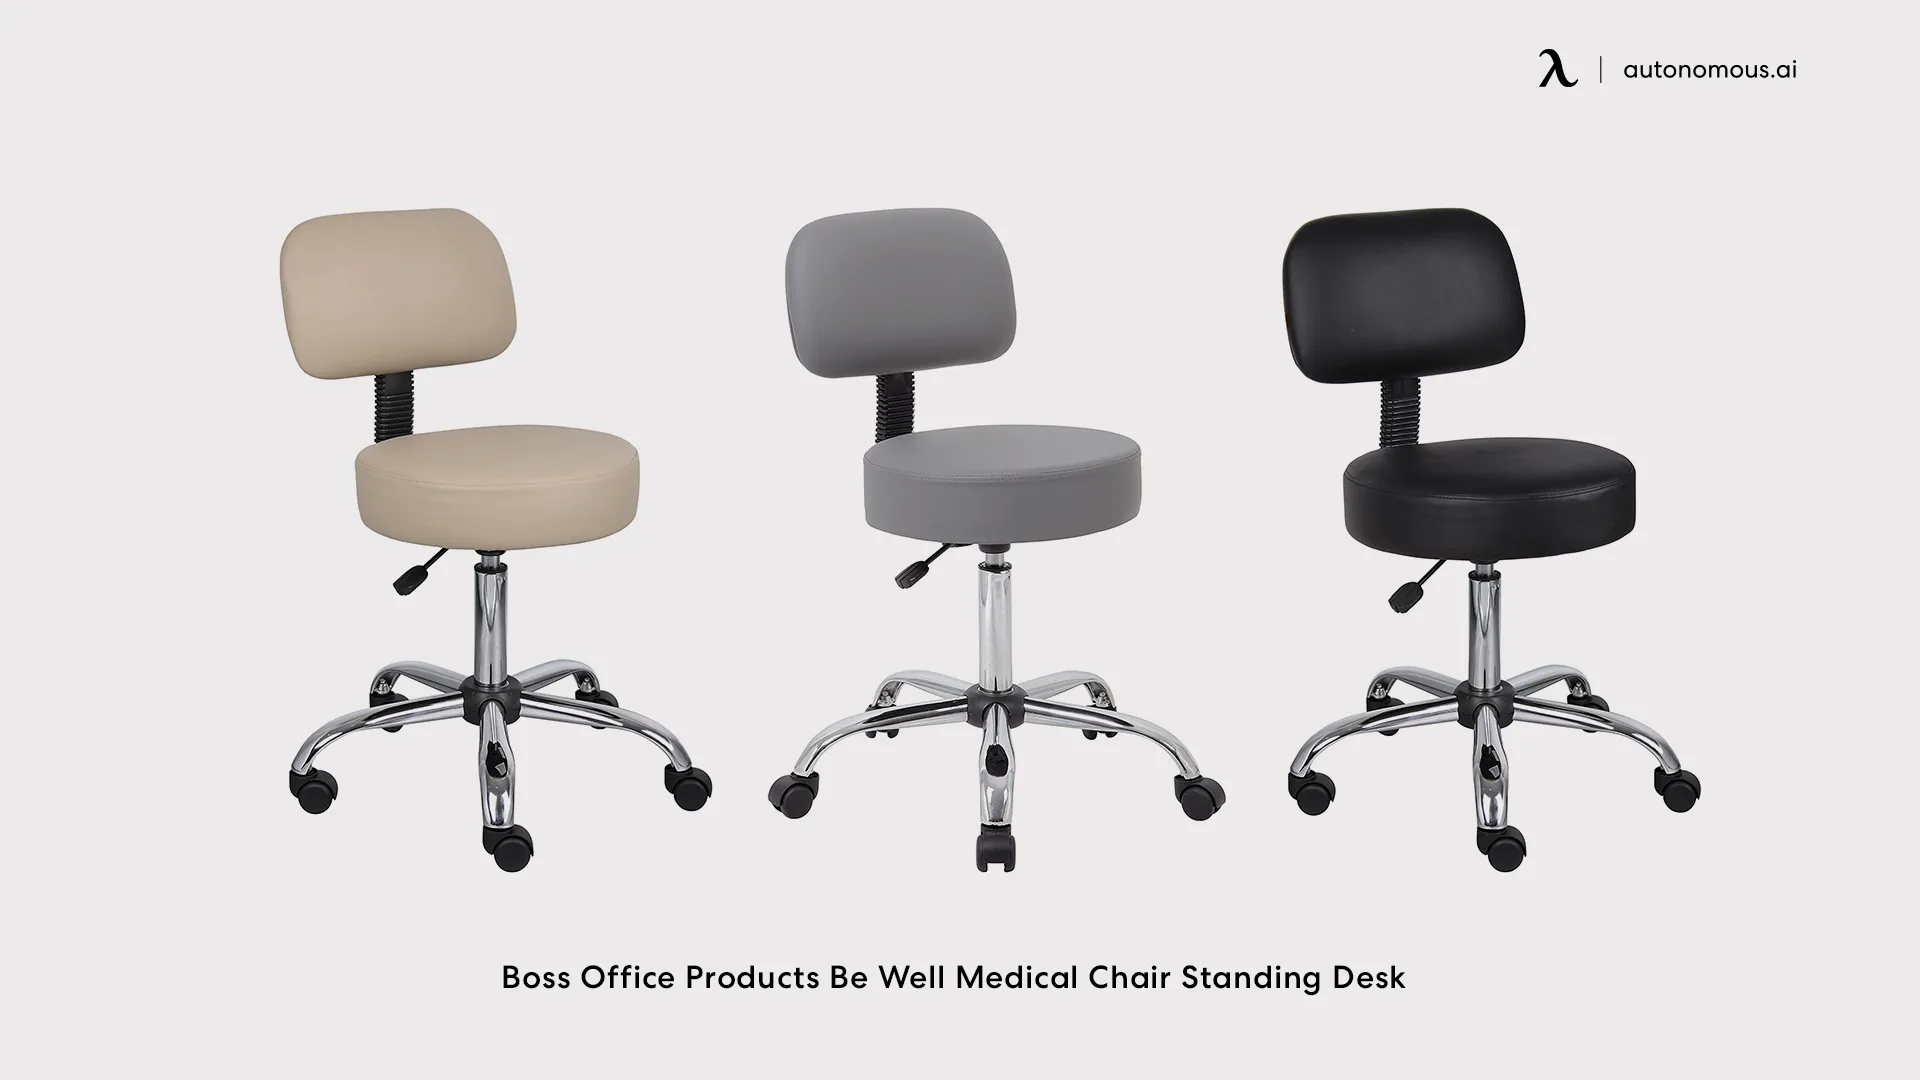 Boss Office Products Be Well Medical Chair Standing Desk